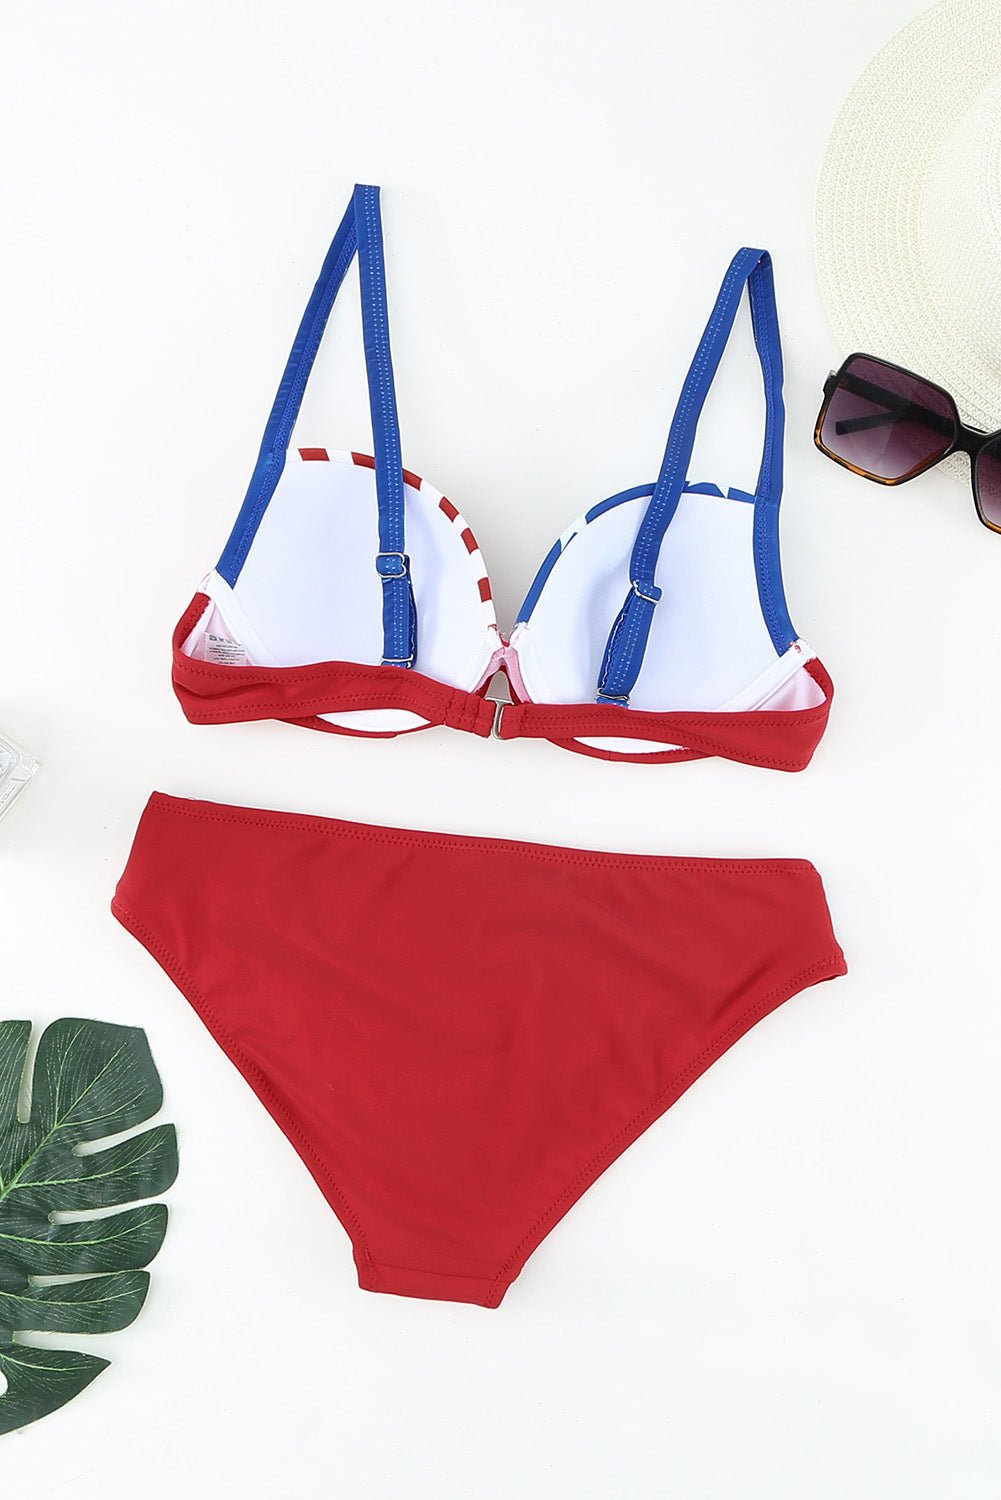 Enchanting Waves Bikini Set - Let the Sea Embrace Your Curves with Elegance and Romance - Unmatched Comfort for a Mesmerizing Summer Experience - Guy Christopher